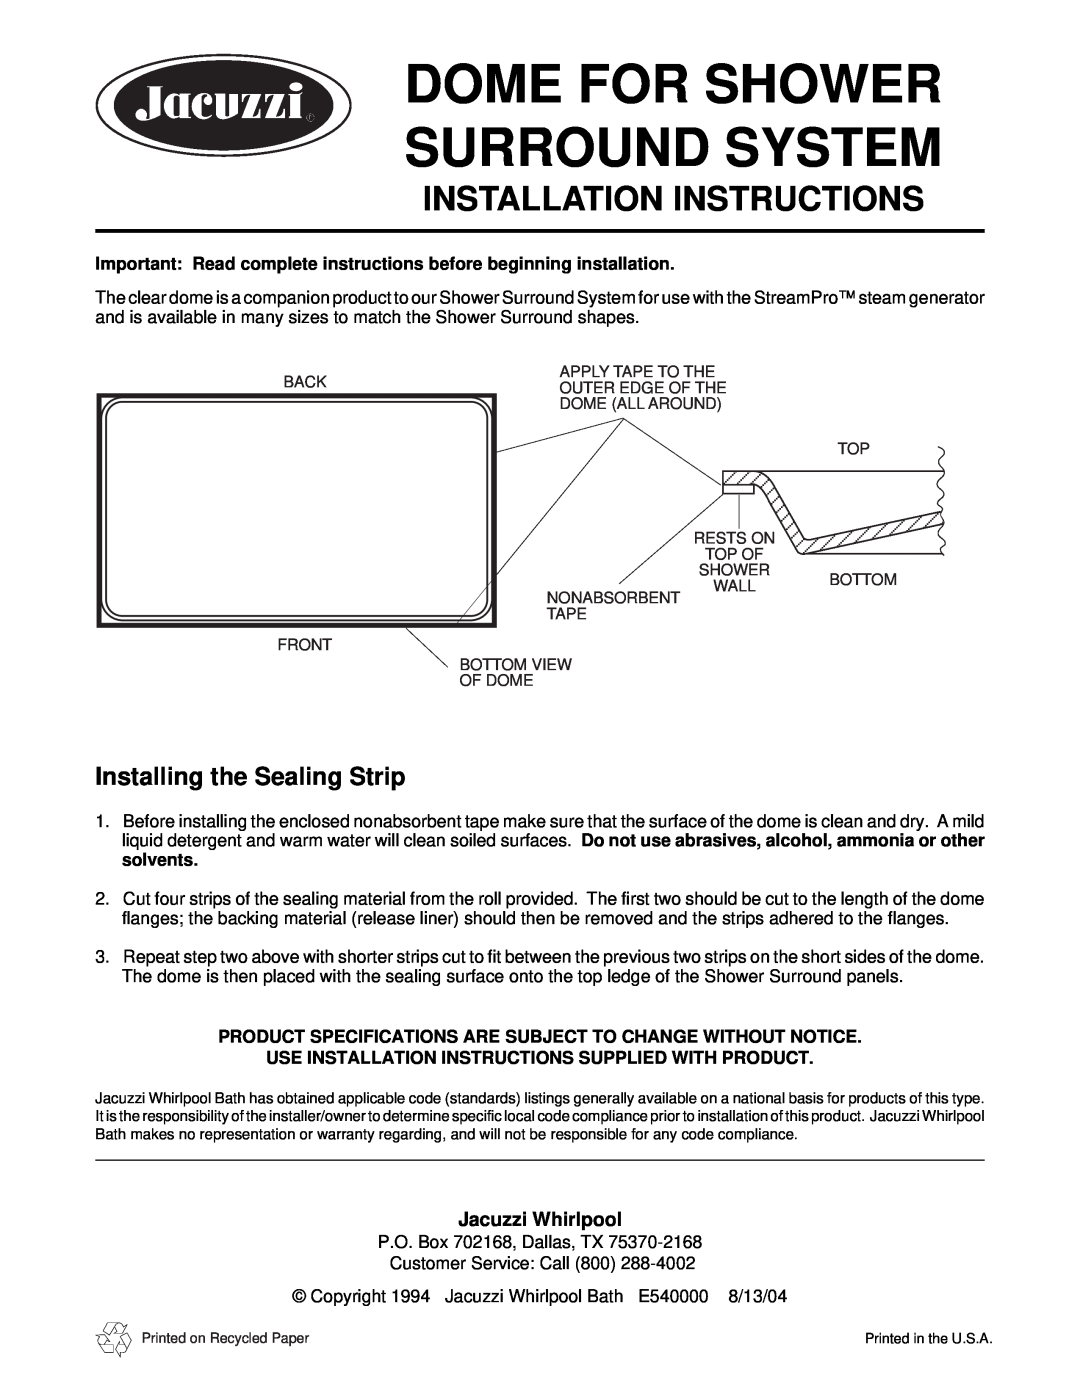 Jacuzzi None installation instructions Dome For Shower Surround System, Installation Instructions, Jacuzzi Whirlpool 